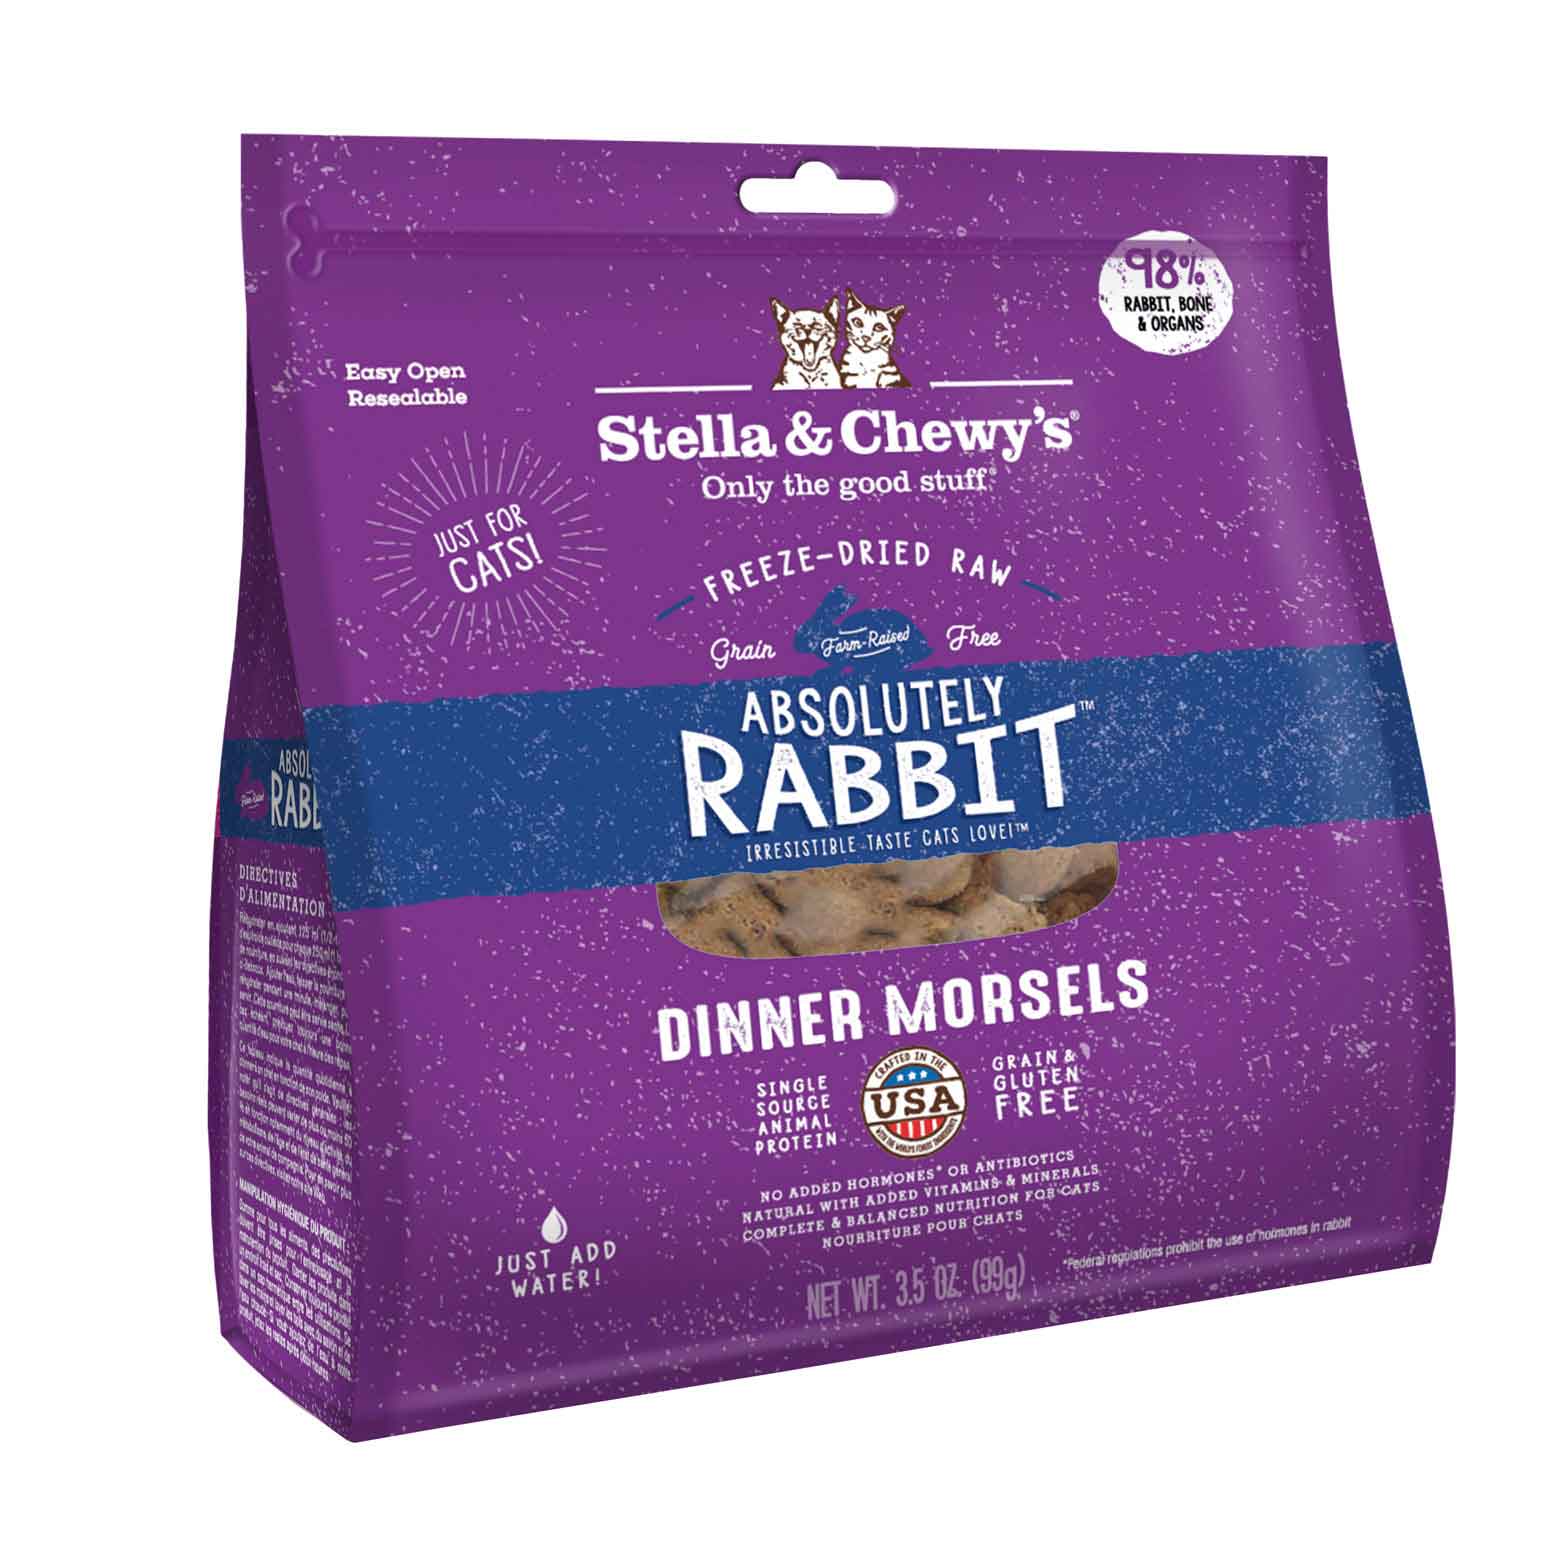 Stella & Chewy's Cat Freeze-Dried Raw, Absolutely Rabbit Dinner Morsels, 3.5 Ounces